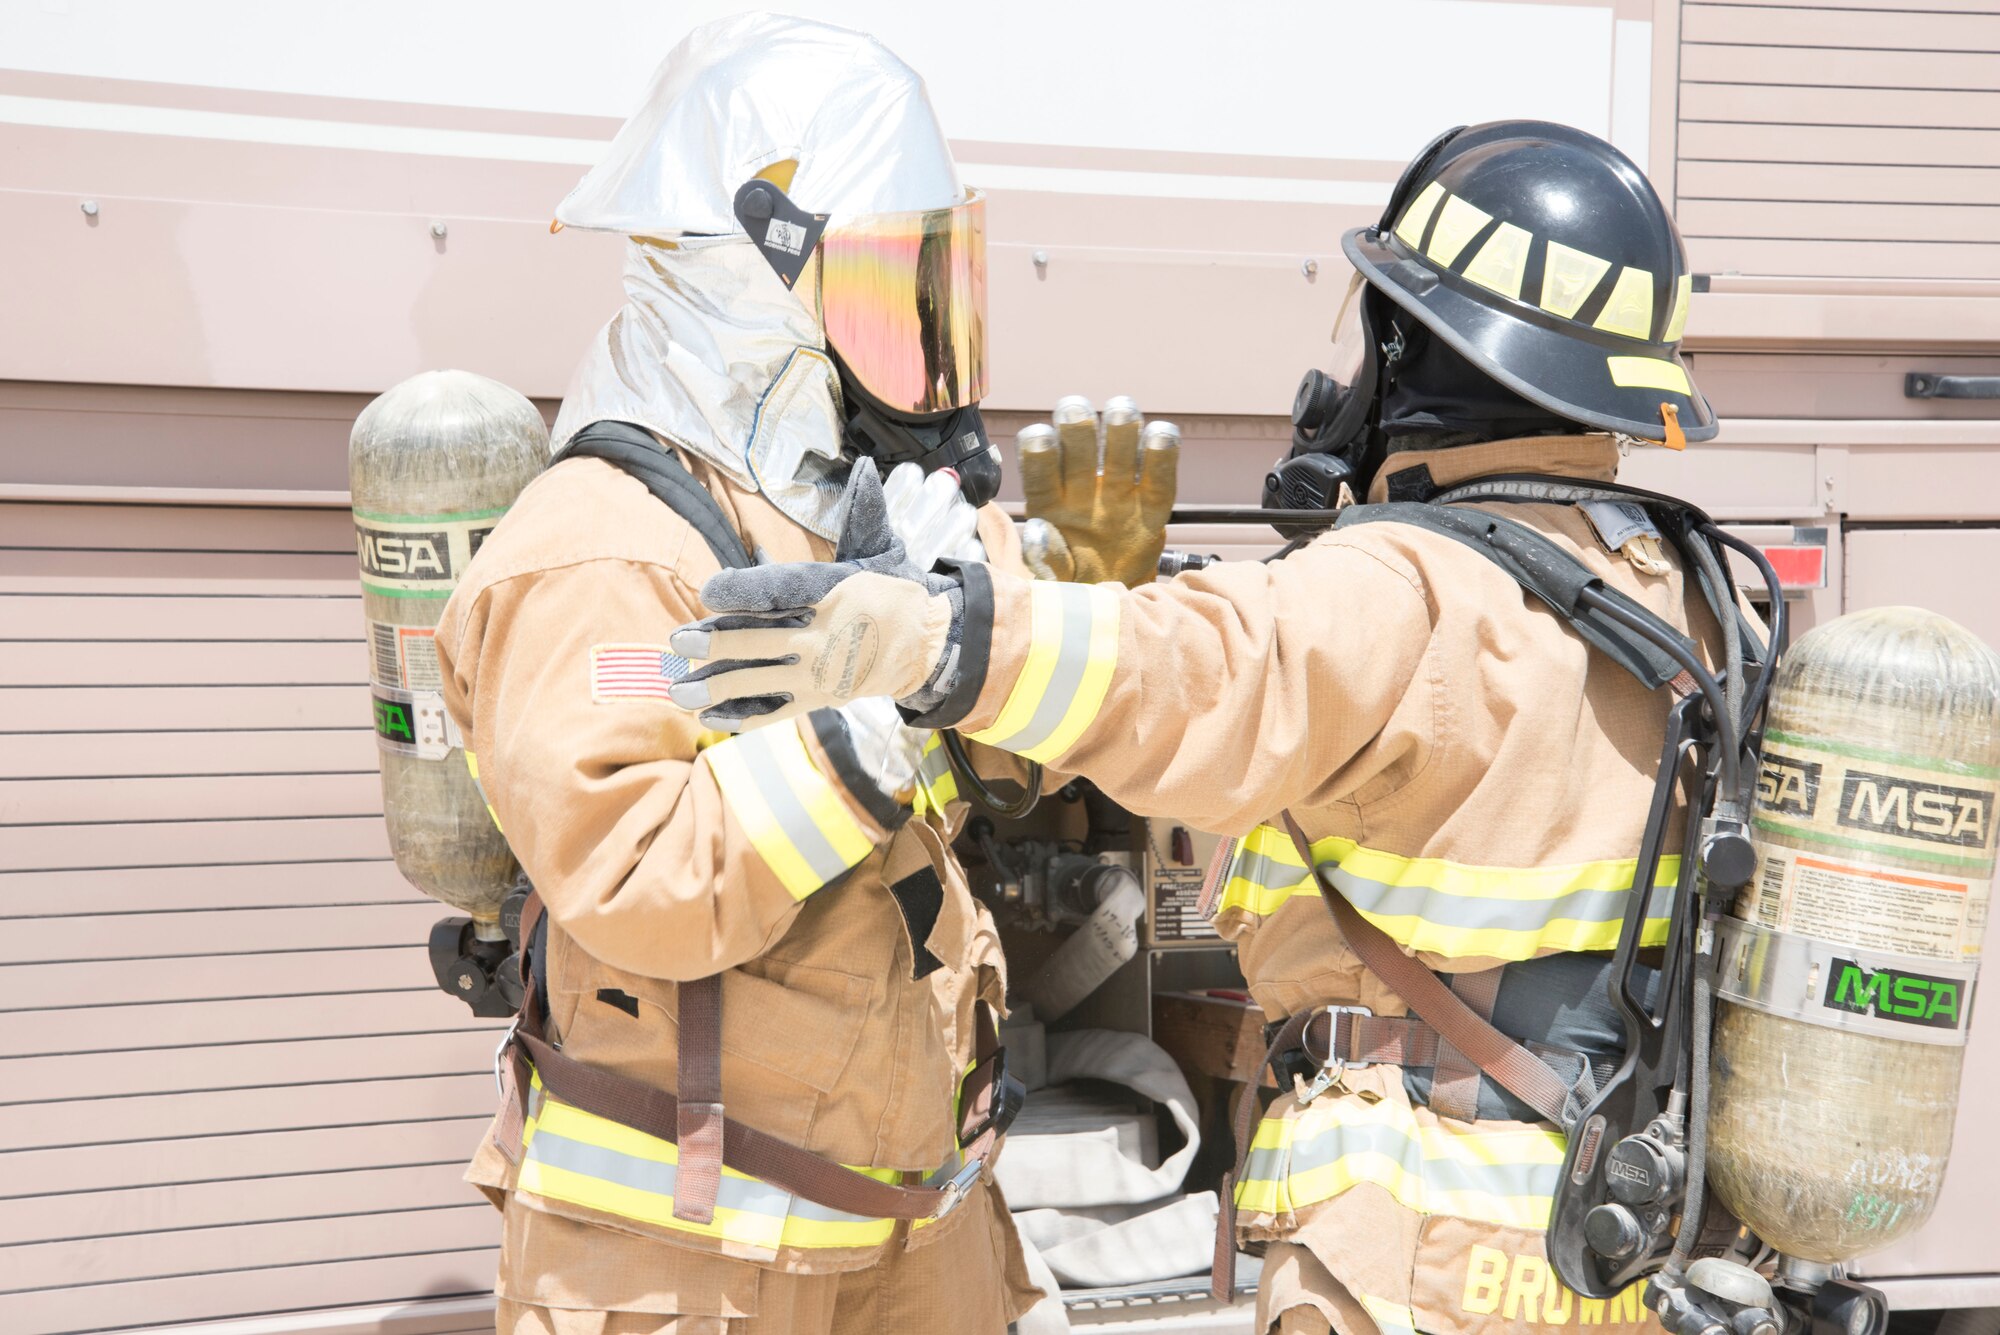 Two U.S. Air Force fire fighters from the 380th Expeditionary Civil Engineer Squadron check their equipment during a joing agency exercise here, May 2. (U.S. Air National Guard photo by Staff Sgt. Erica Rodriguez)